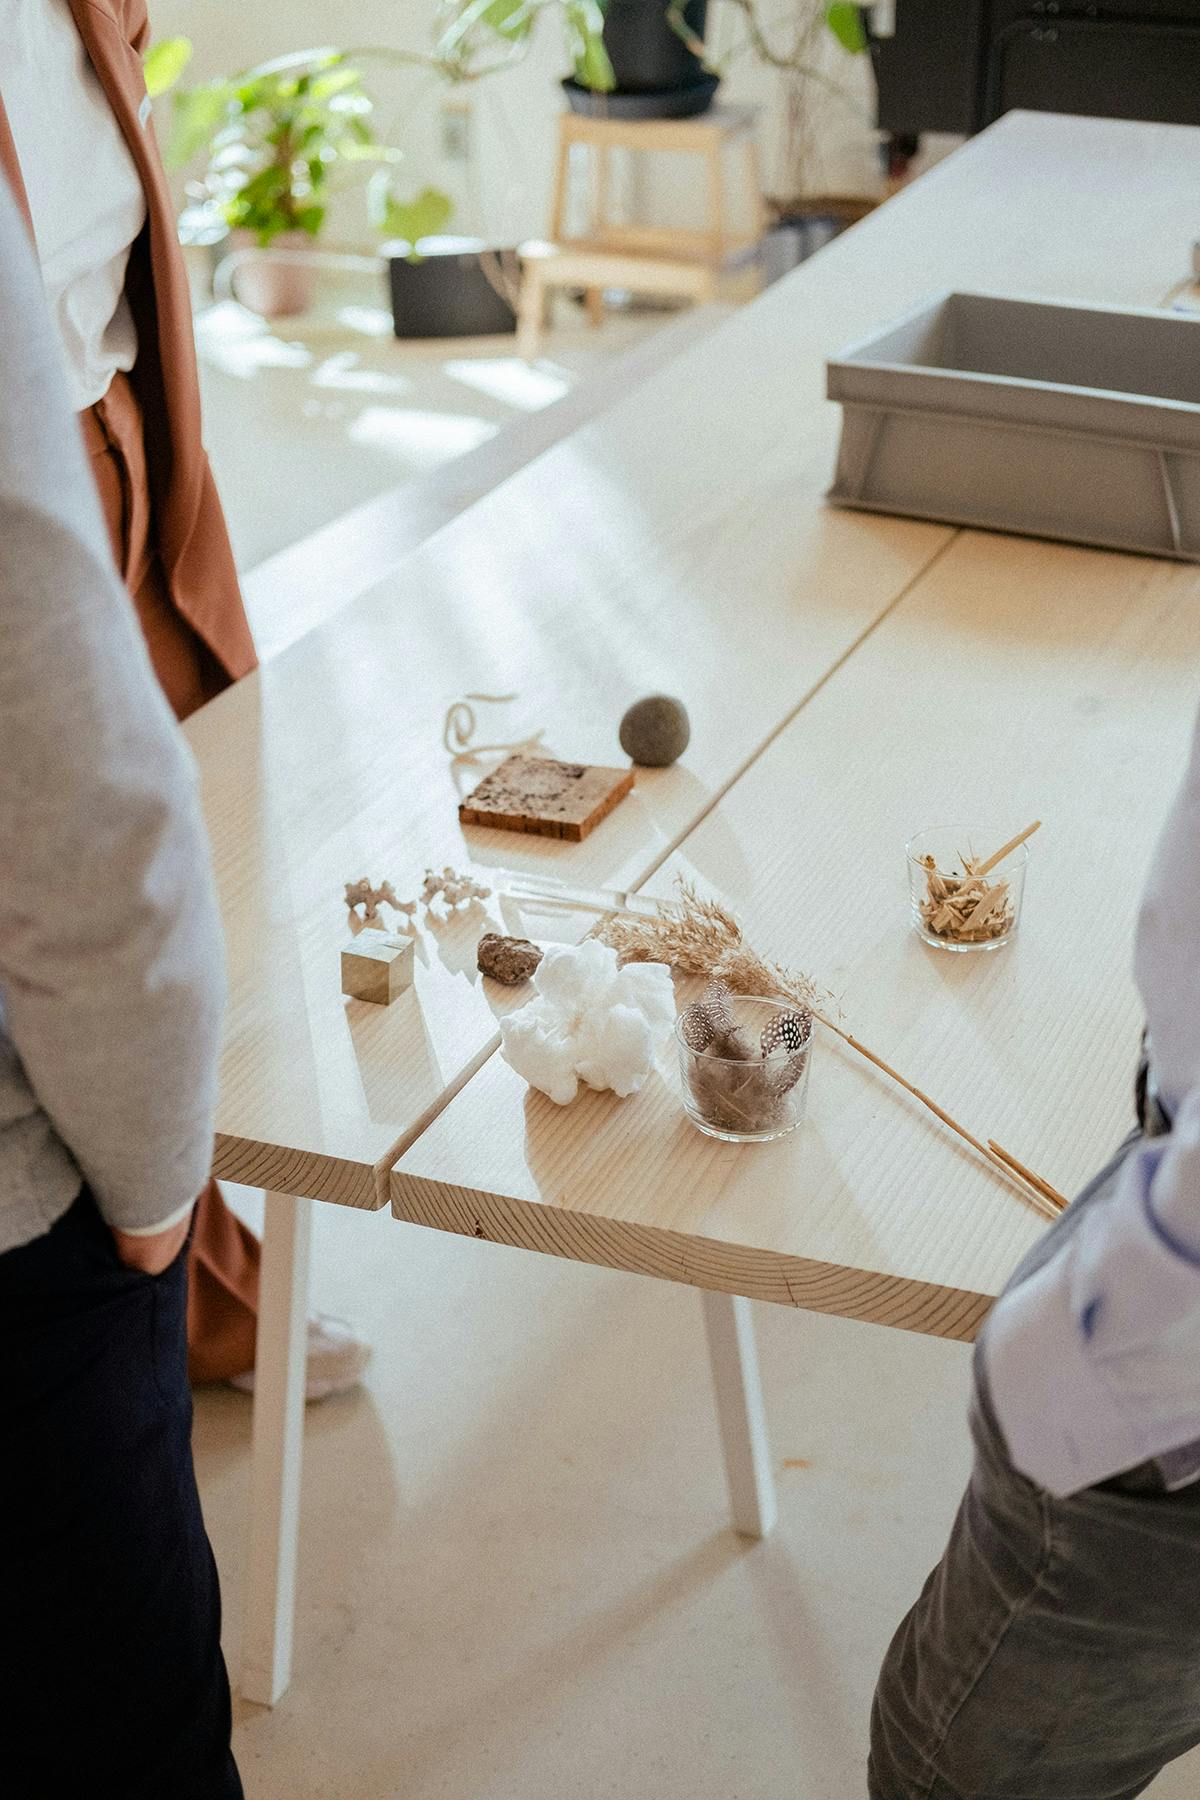 Different objects and materials on a table with people standing around